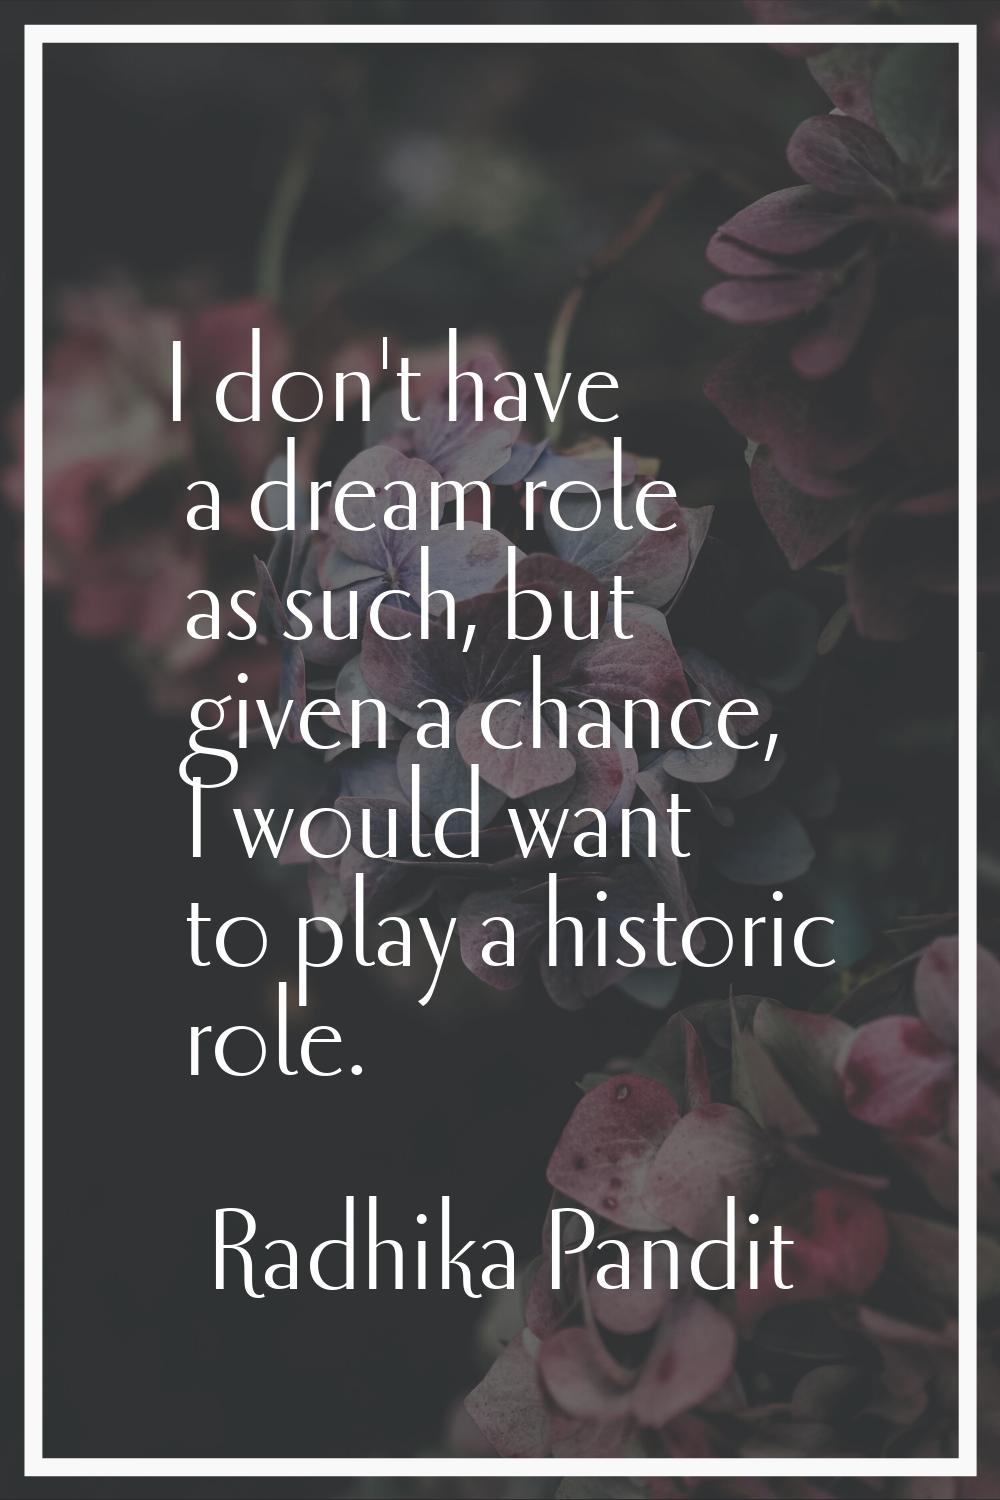 I don't have a dream role as such, but given a chance, I would want to play a historic role.